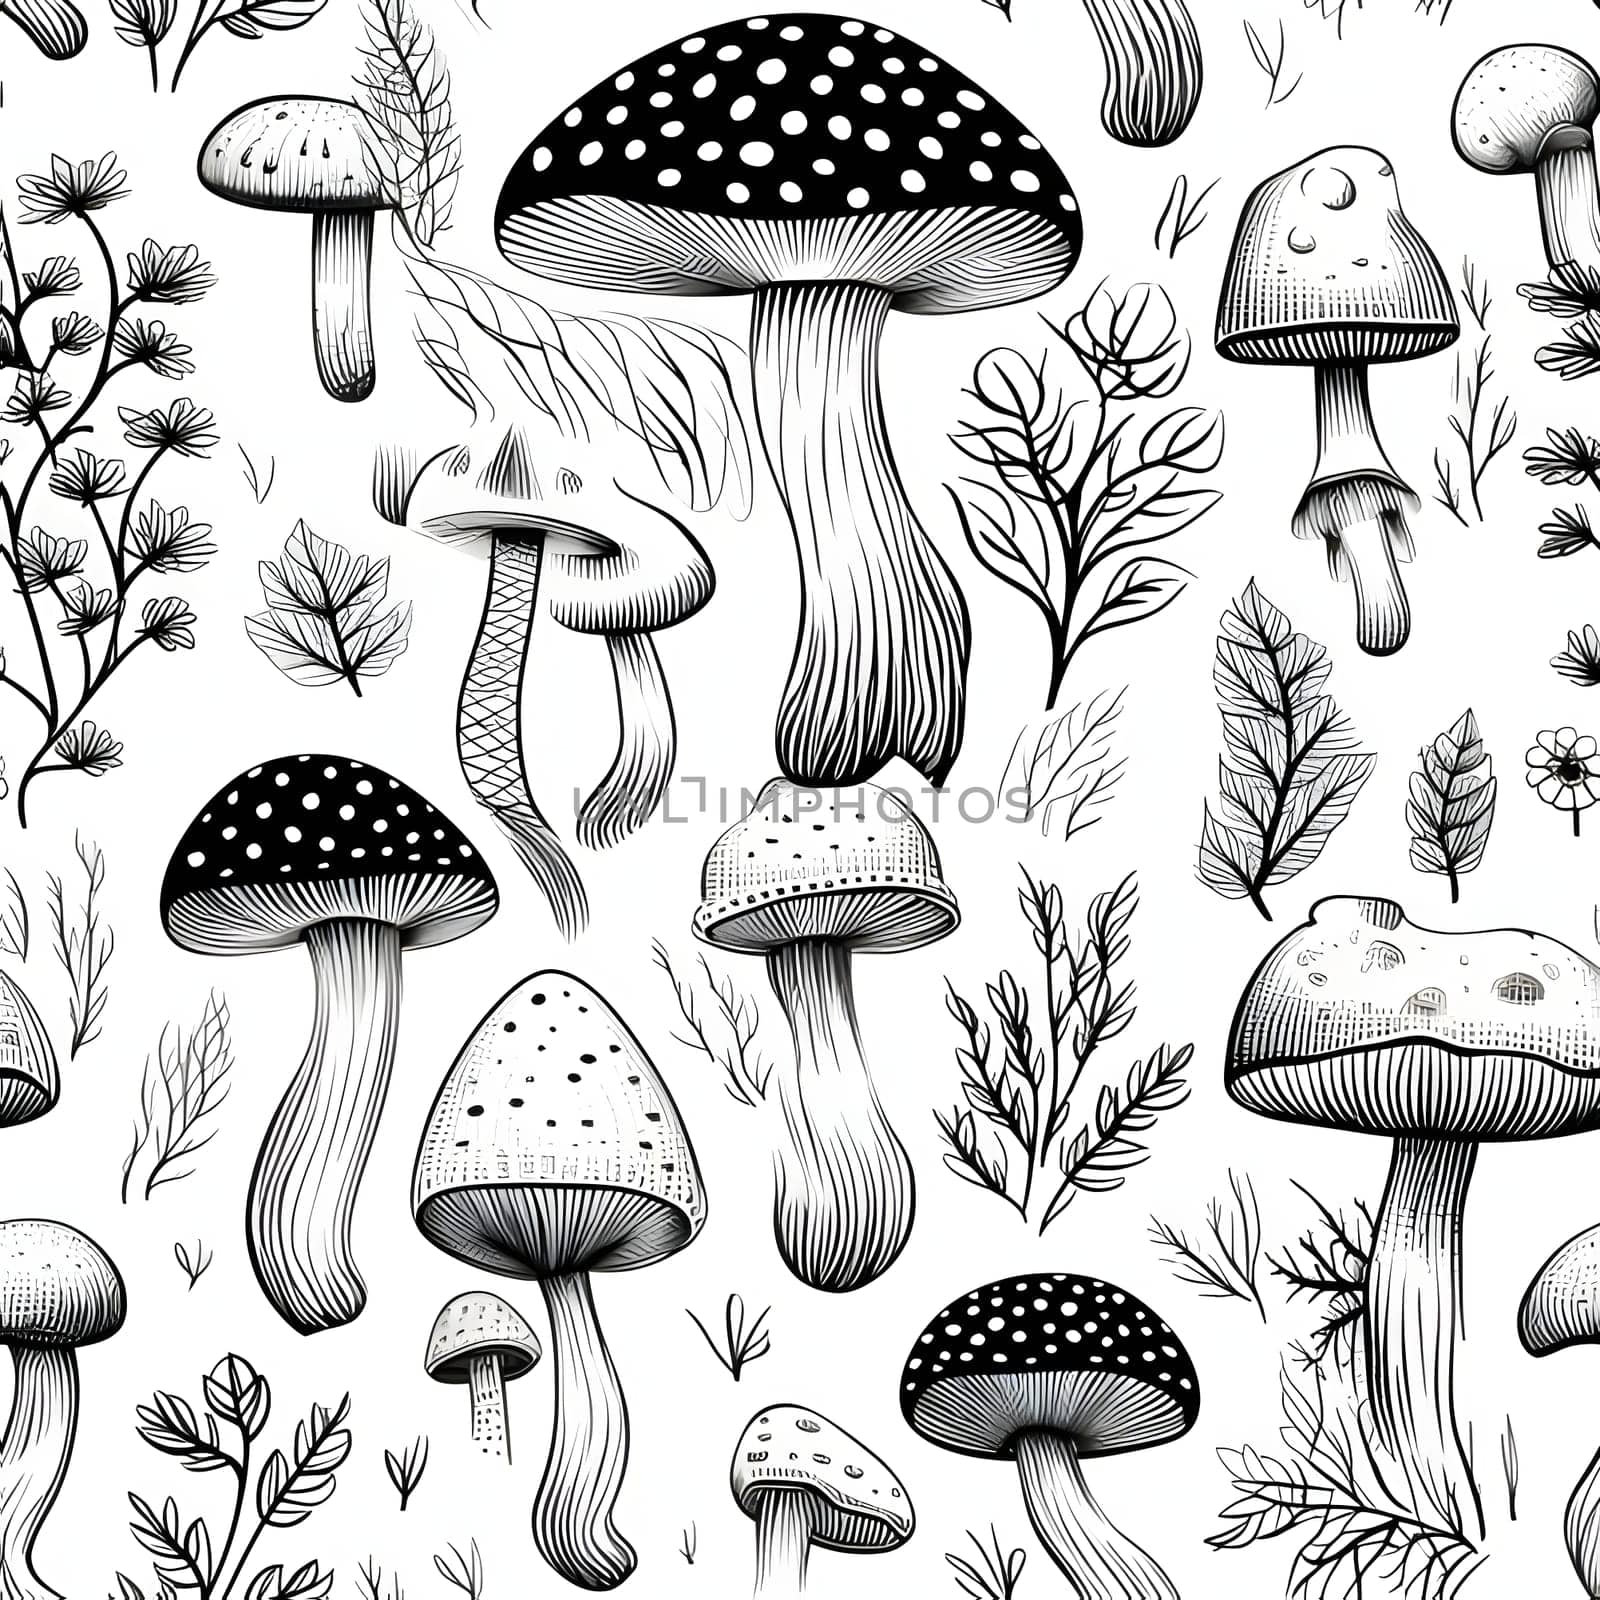 Patterns and banners backgrounds: Seamless pattern with mushrooms and plants. Hand drawn vector illustration.